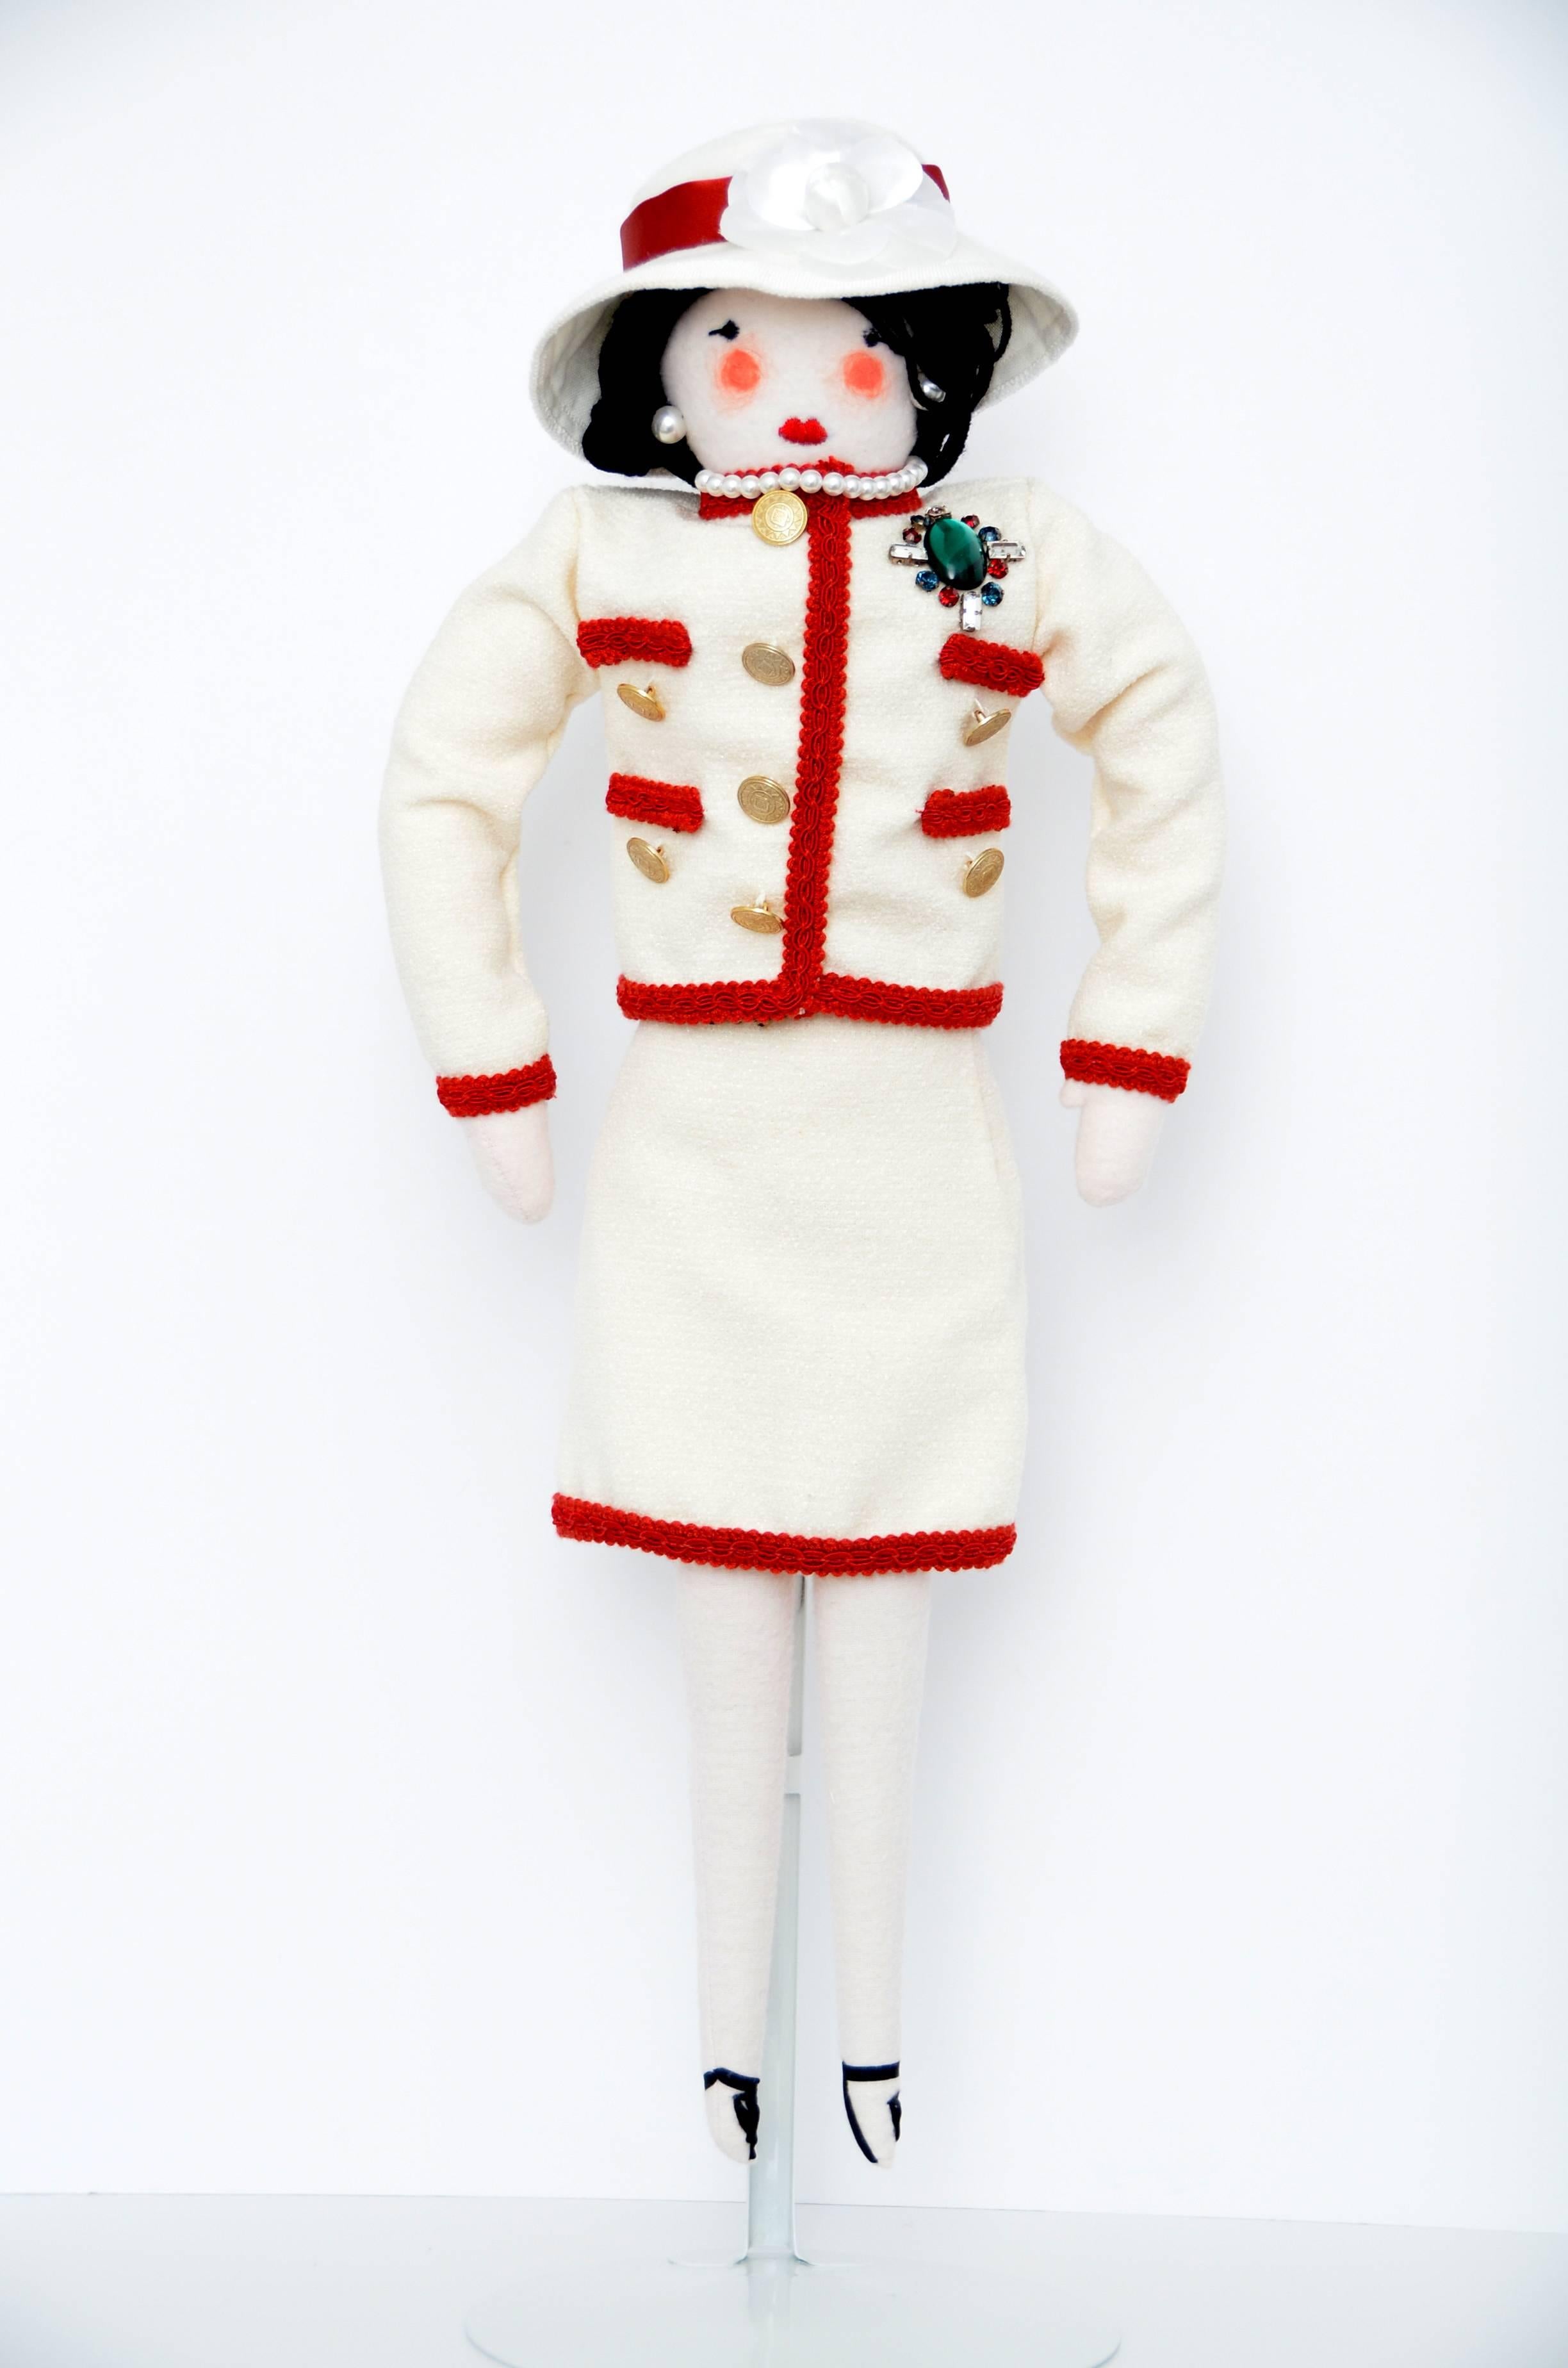 Gray Coco Mademoiselle Chanel Doll Designed By Karl Lagerfeld 2010 